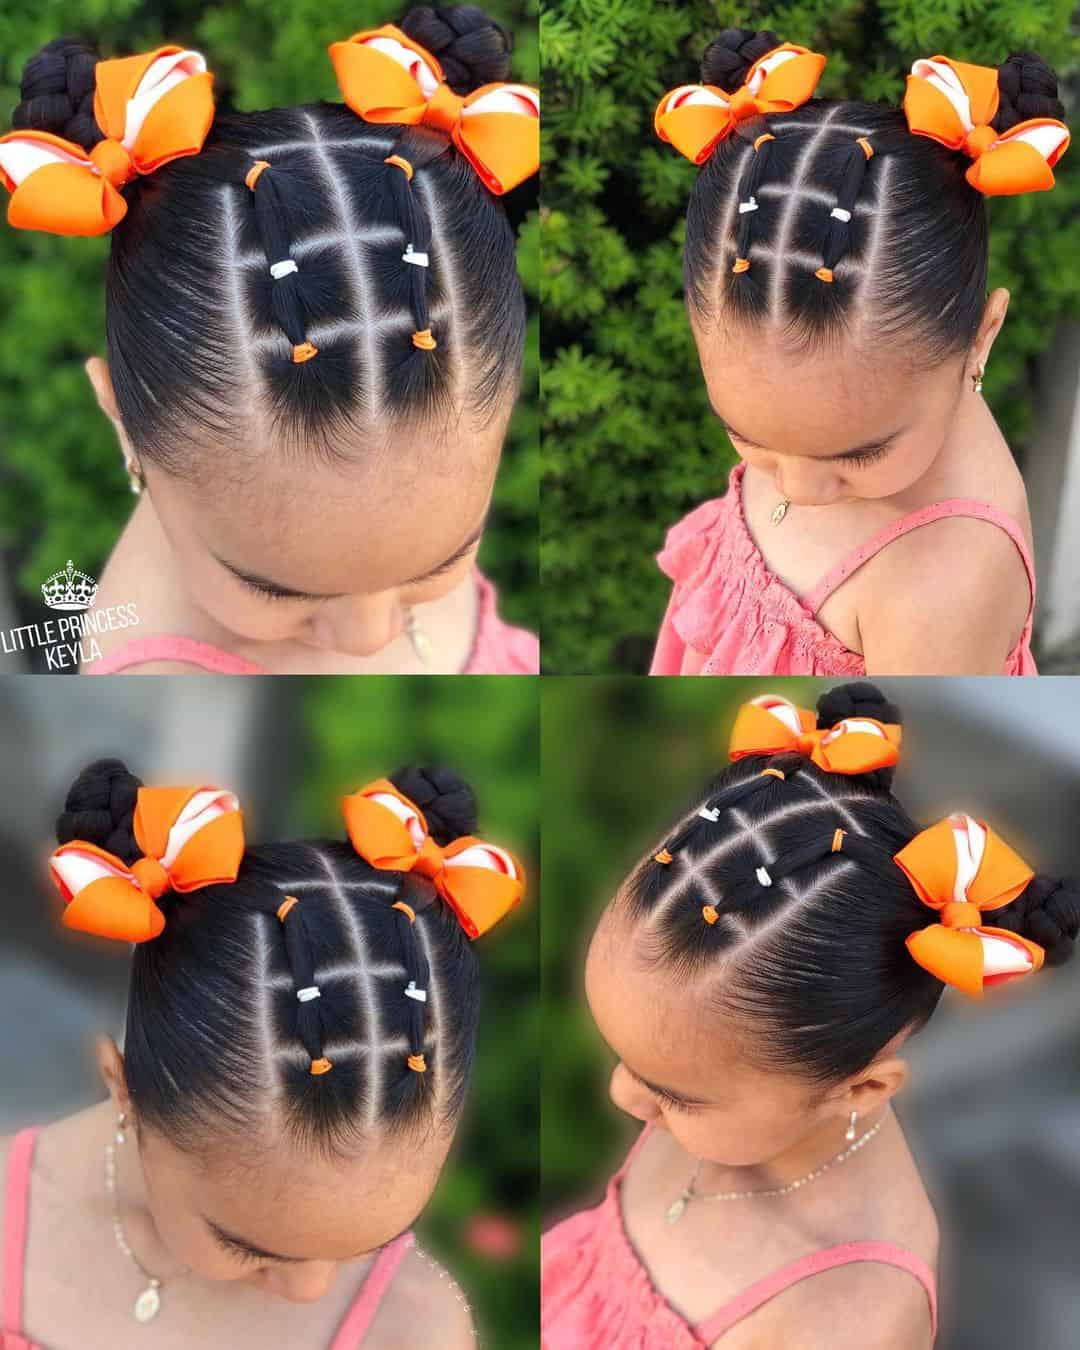 Tips And Tricks For Amazingly Looking Little Girl Hairstyles